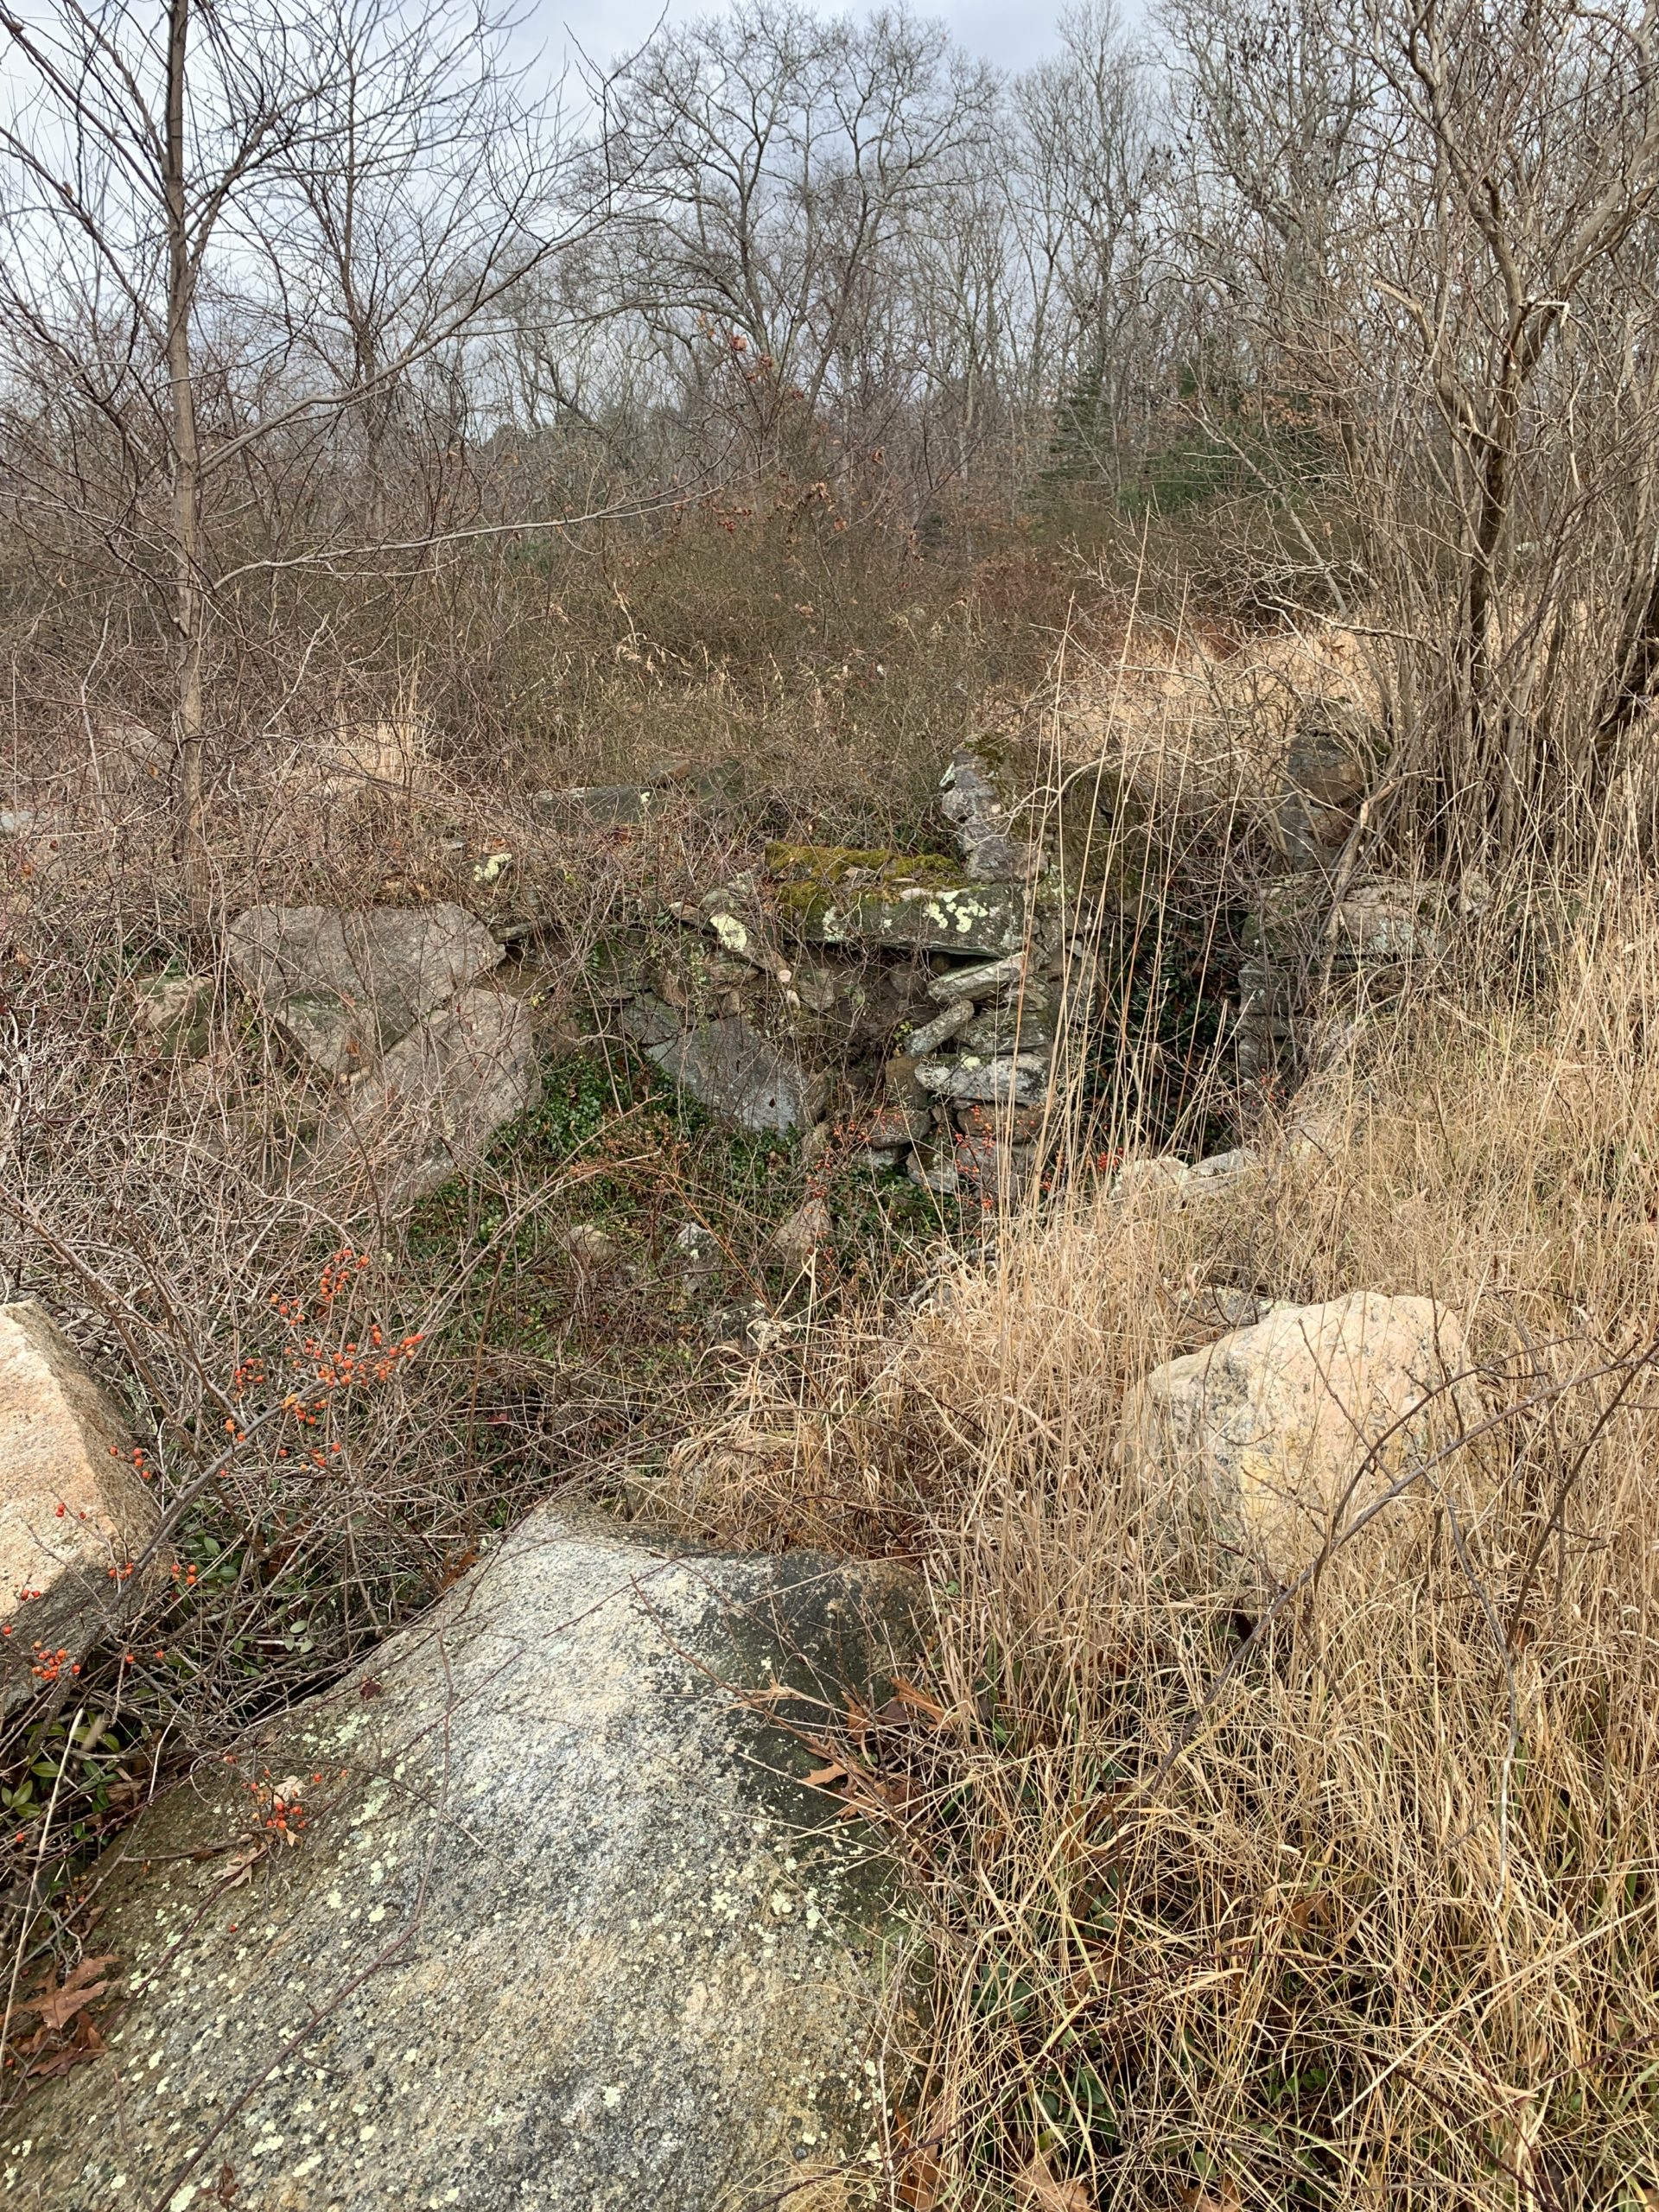 Remains of Foundation of 1691 house on Sheldon Hill courtesy of Sissy Walker